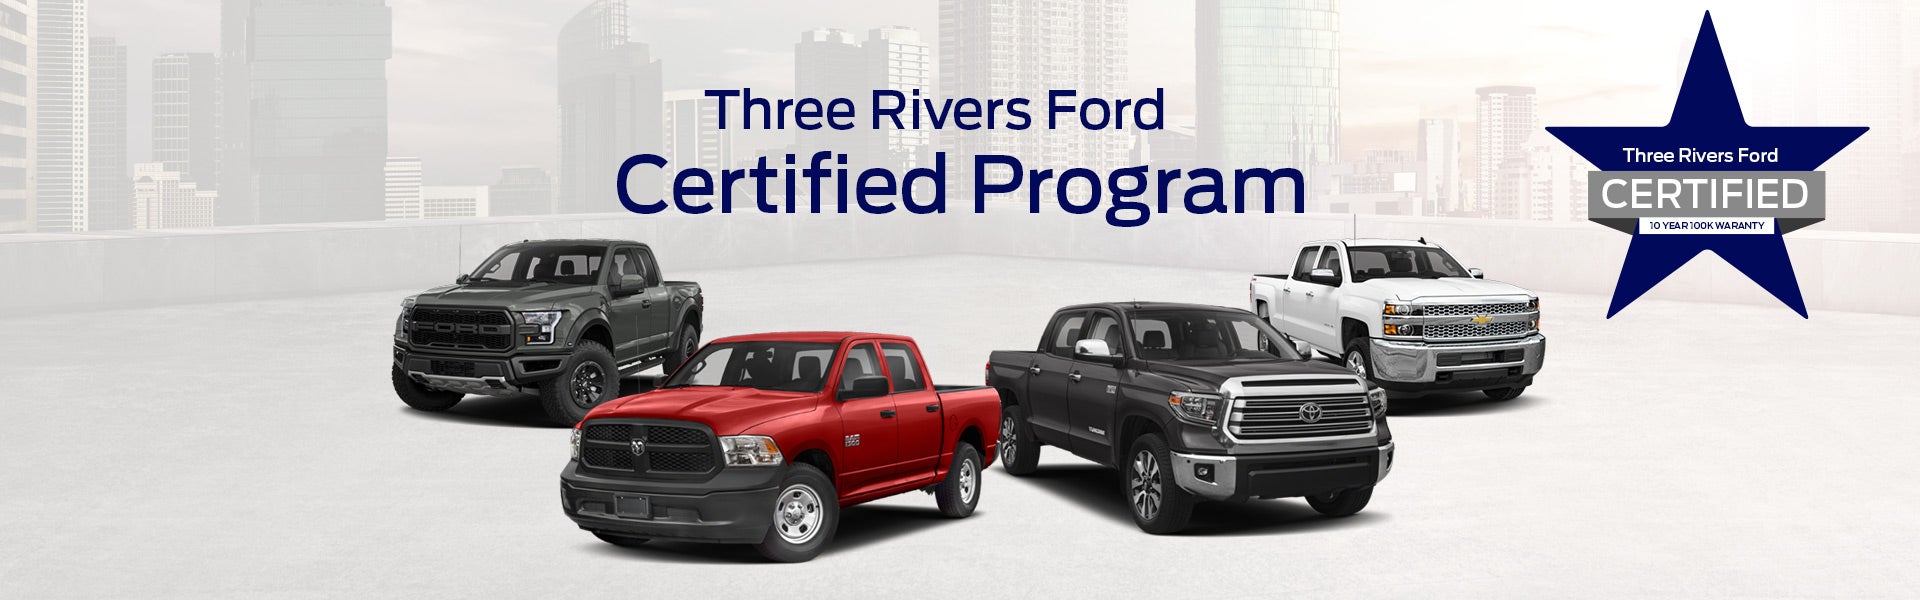 Three Rivers Ford Certified Program